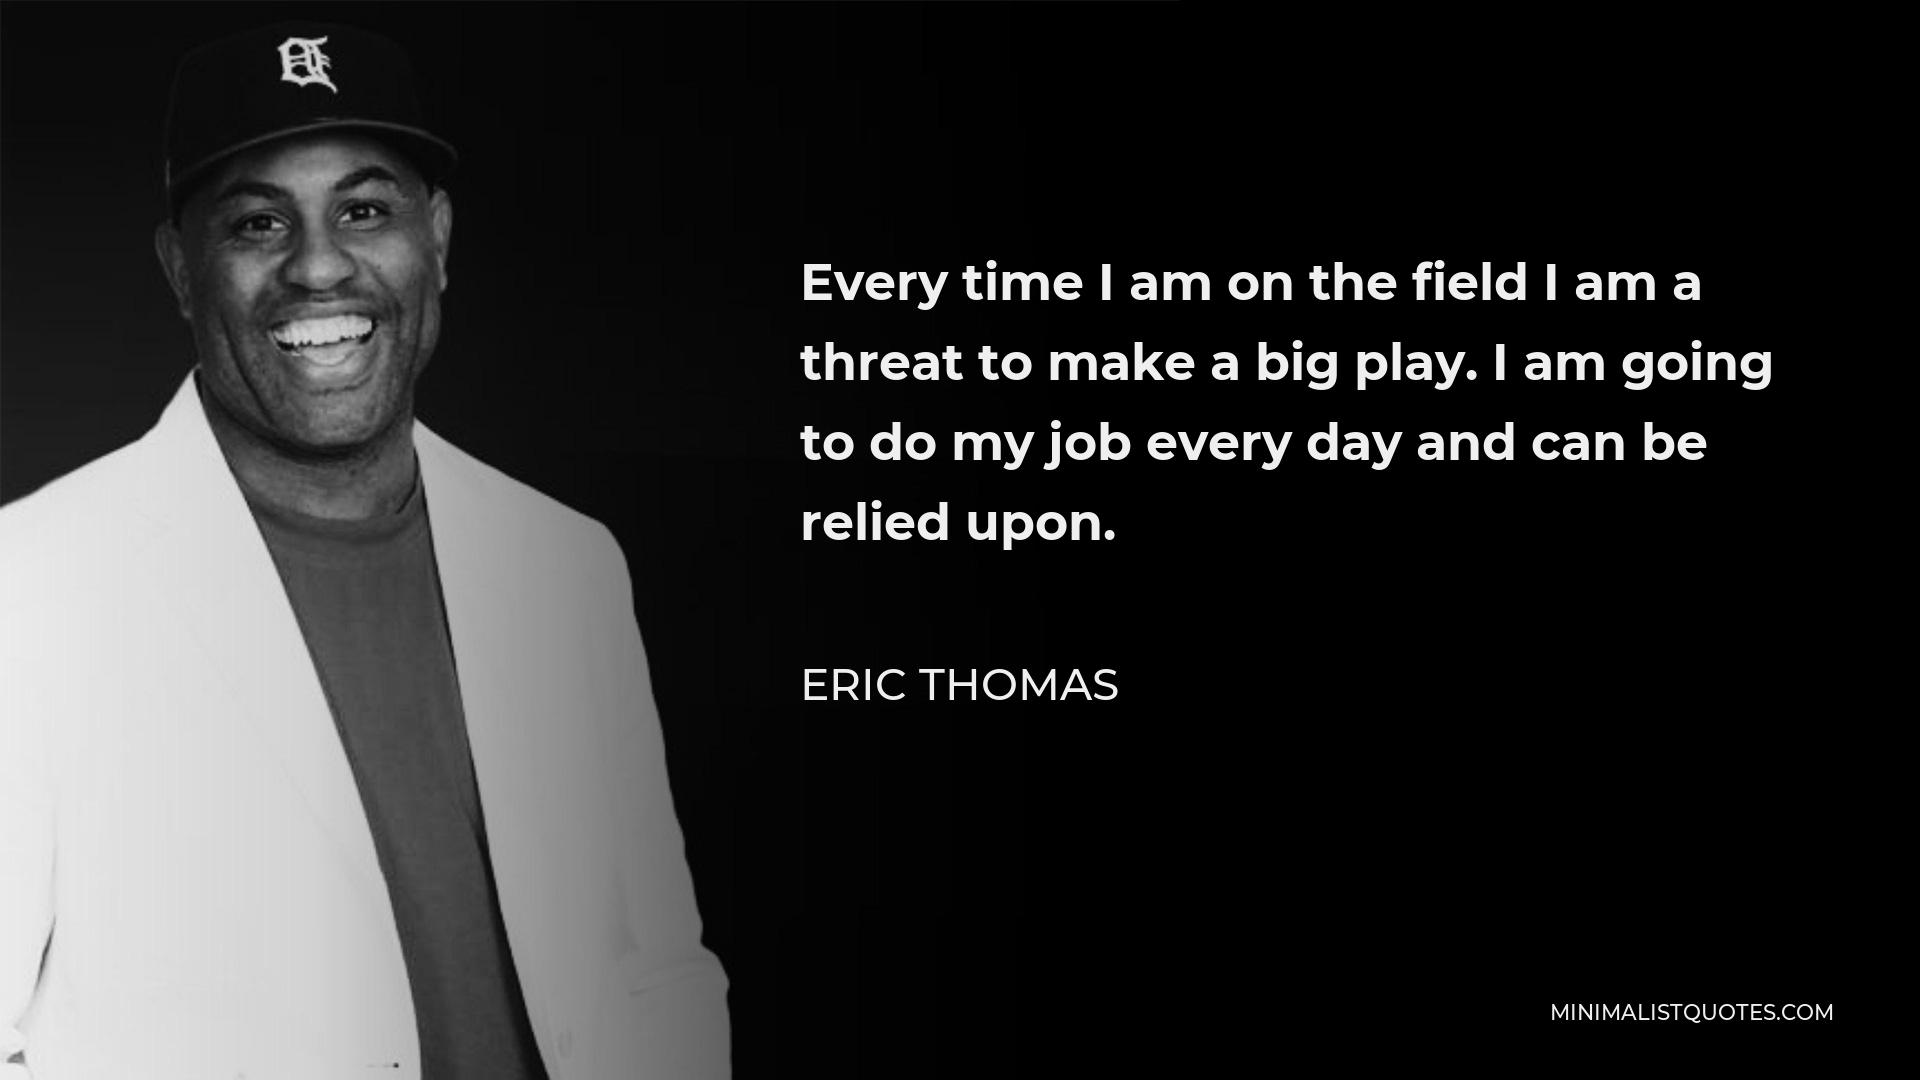 Eric Thomas Quote - Every time I am on the field I am a threat to make a big play. I am going to do my job every day and can be relied upon.